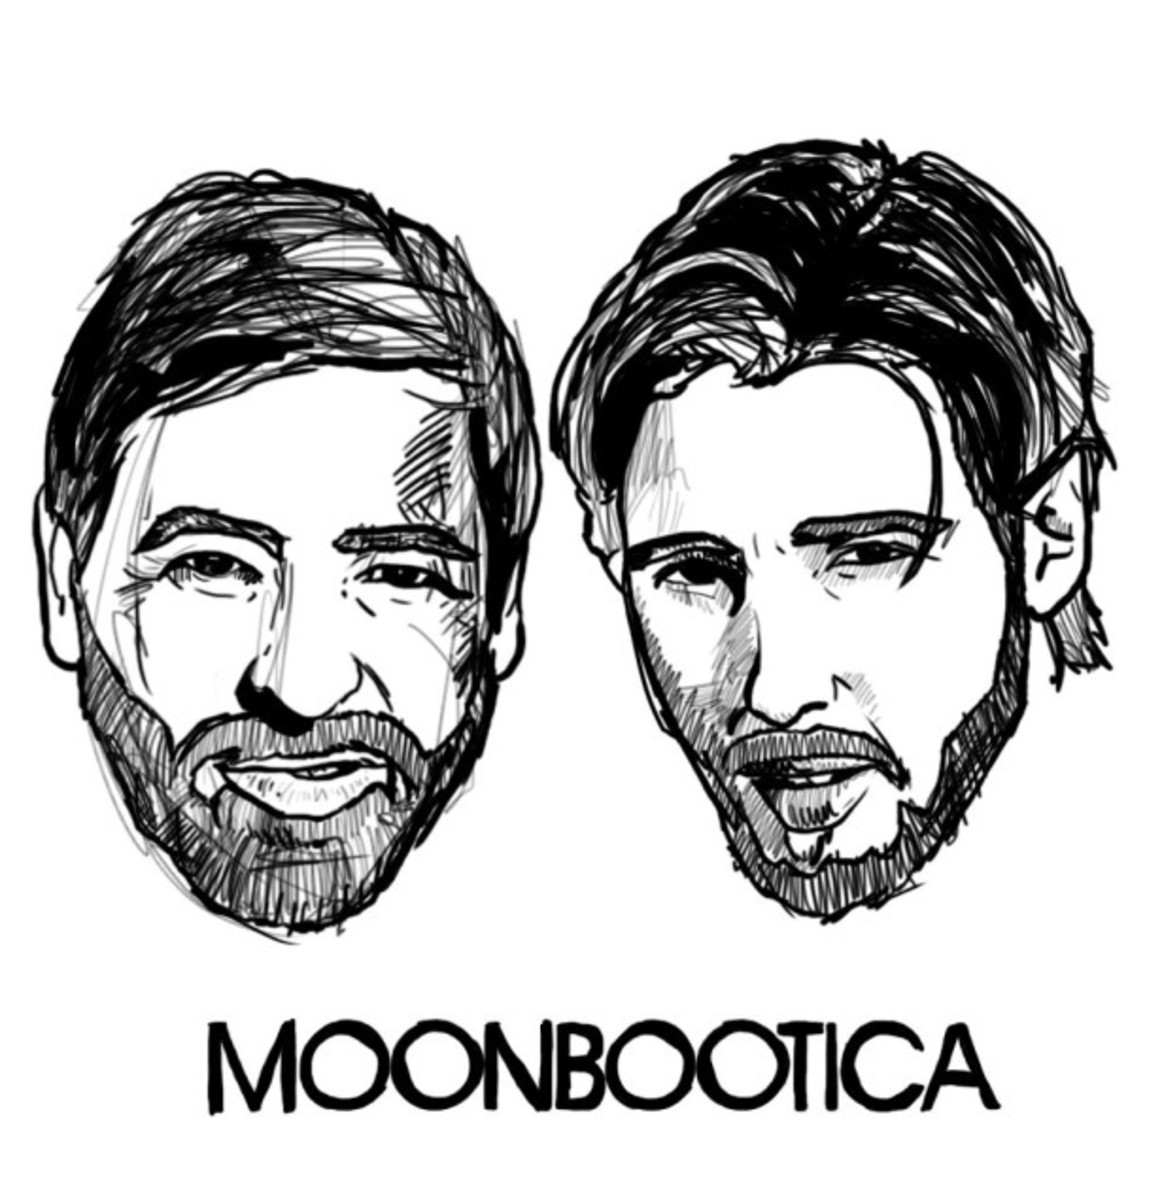 cd-moonbootica-our-disco-is-louder-than-yours-dj-hip-hop-14473-MLB4219299557_042013-F1-e1409411315455